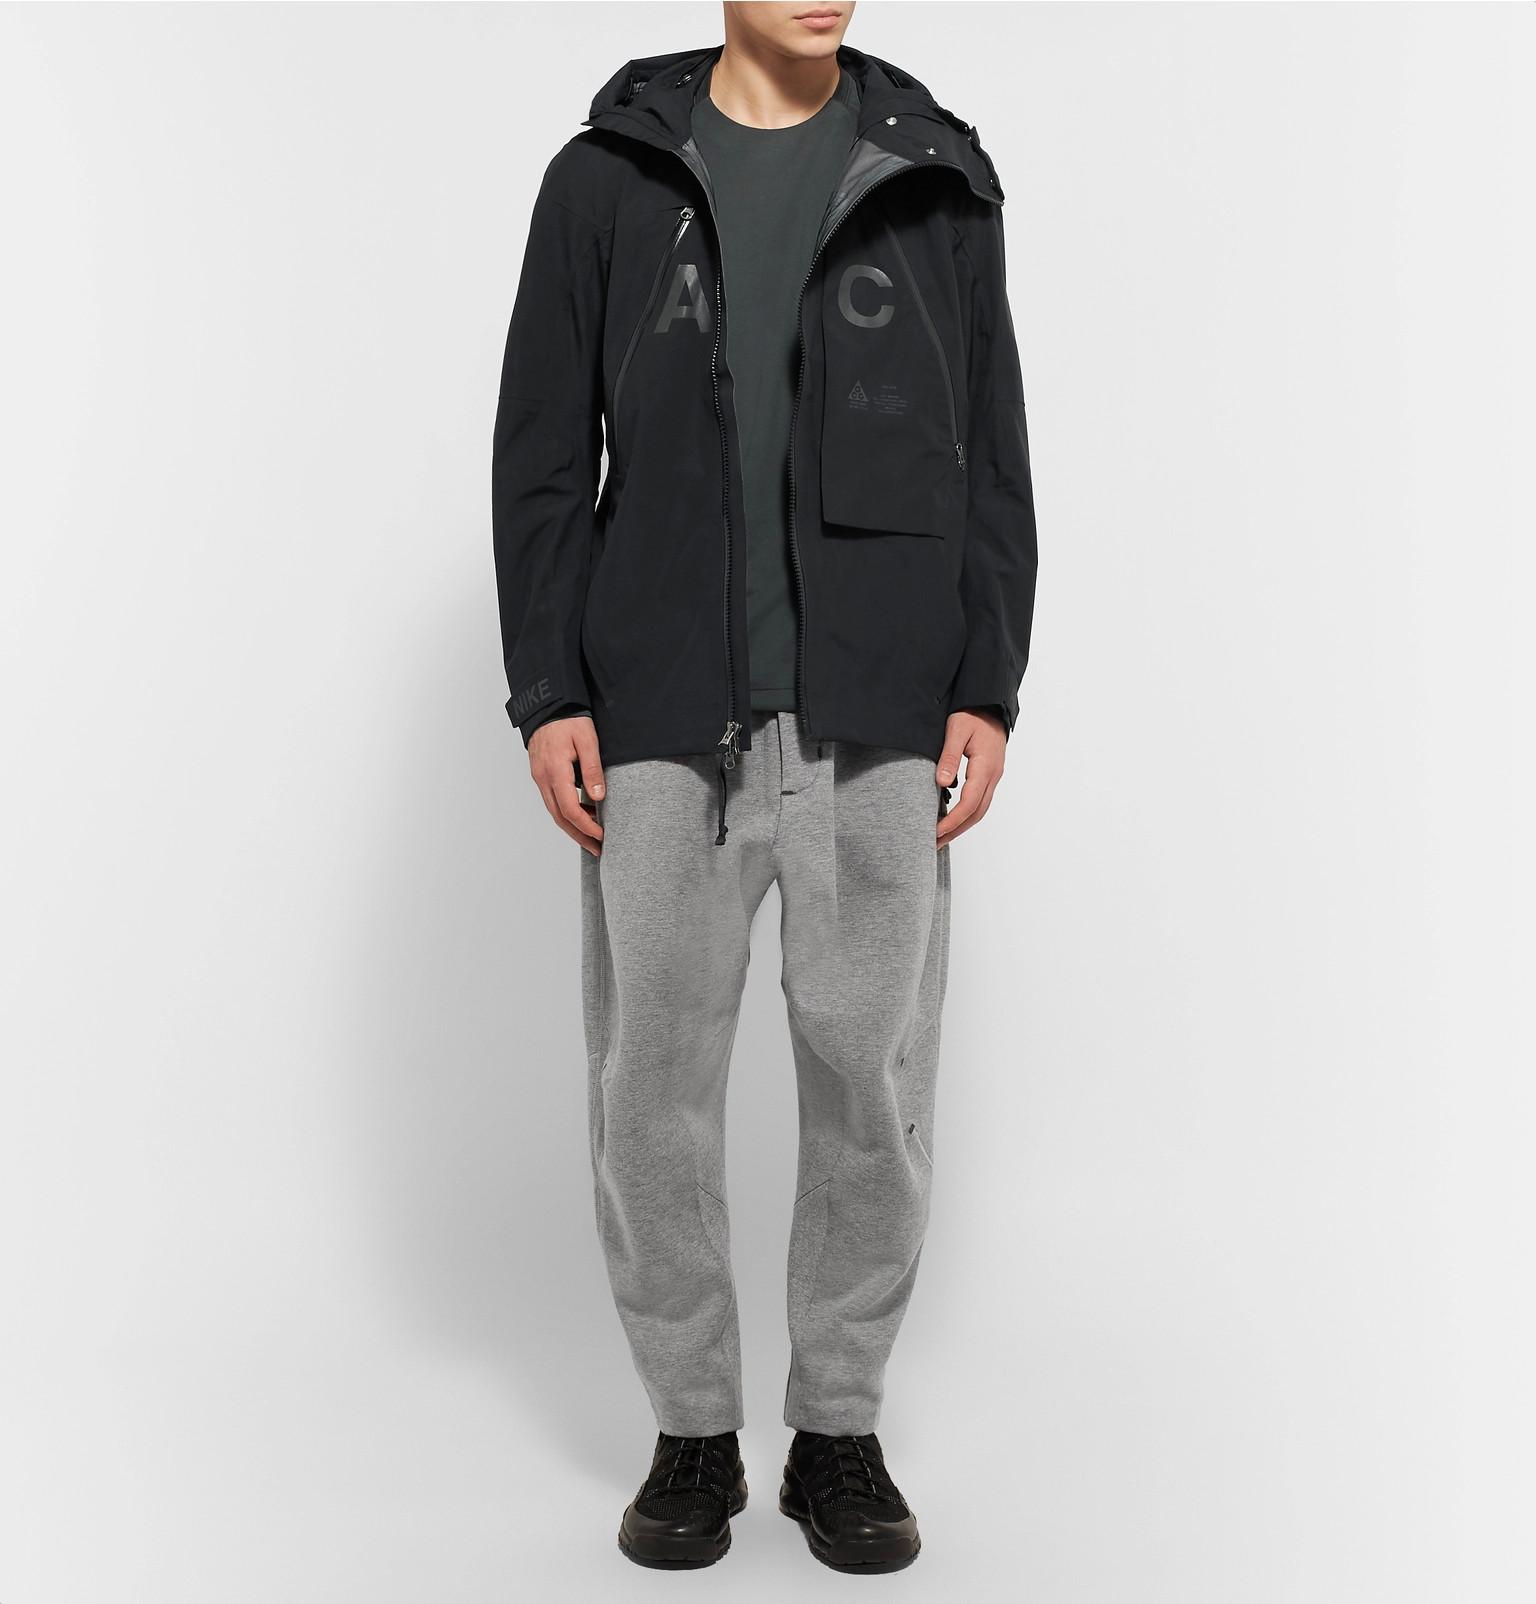 Nike Synthetic Acg Alpine Gore-tex Hooded Jacket in Black for Men - Lyst